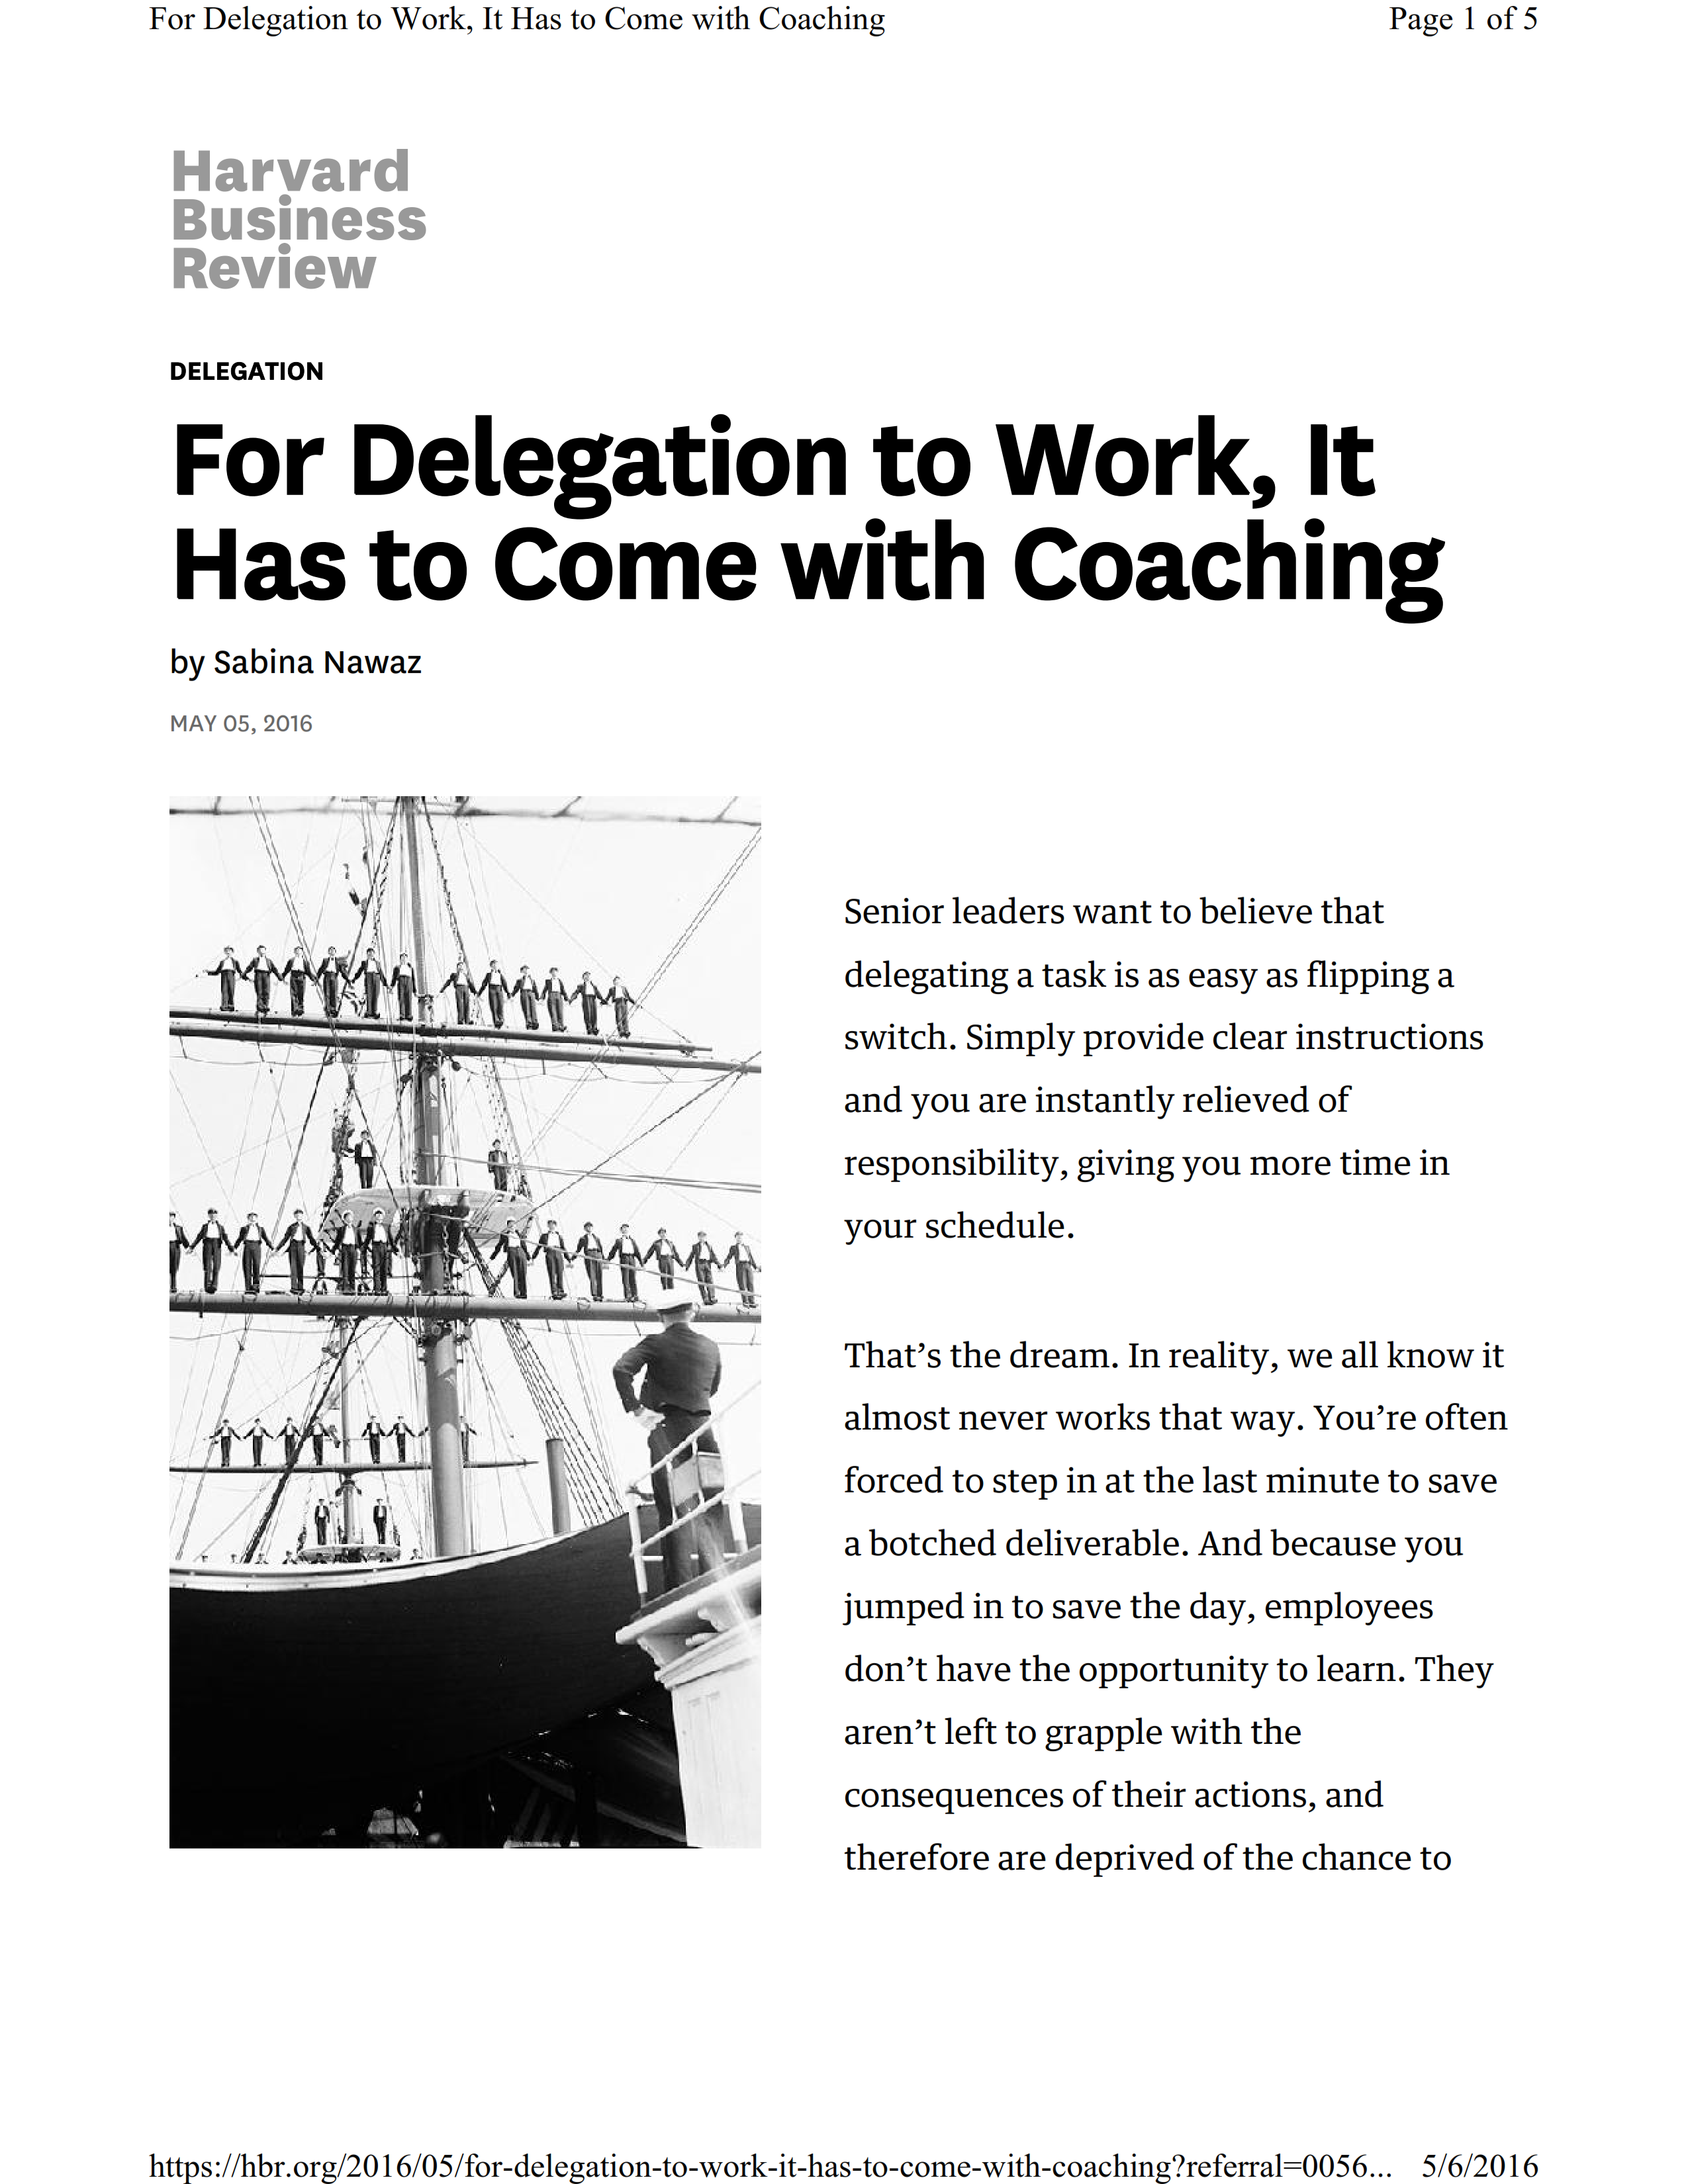 For Delegation to Work HBR May2016_001